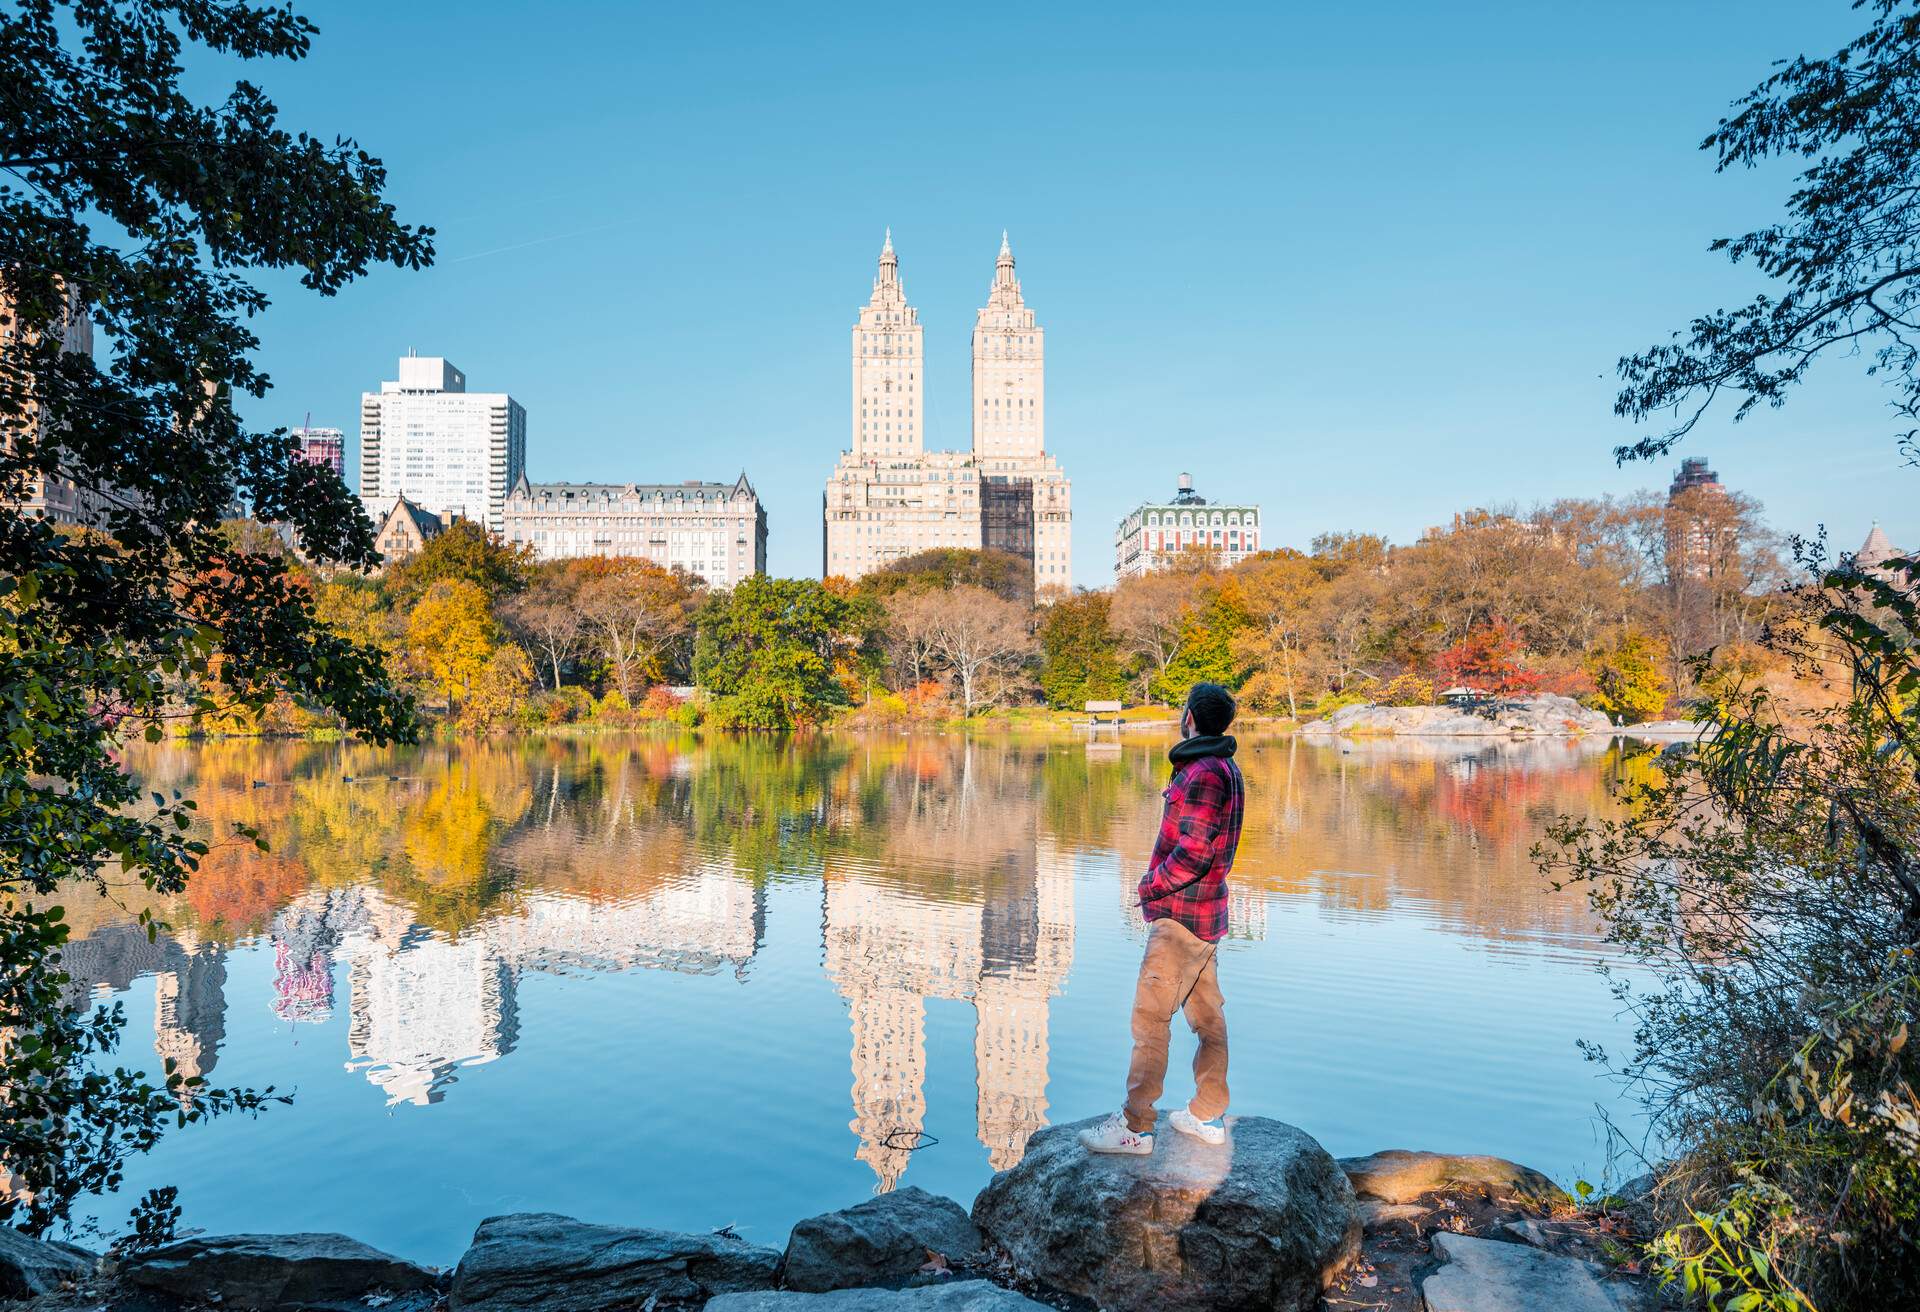 DEST_USA_NEW_YORK_NYC_CENTRAL-PARK_AUTUMN_FALL_GettyImages-1307616962